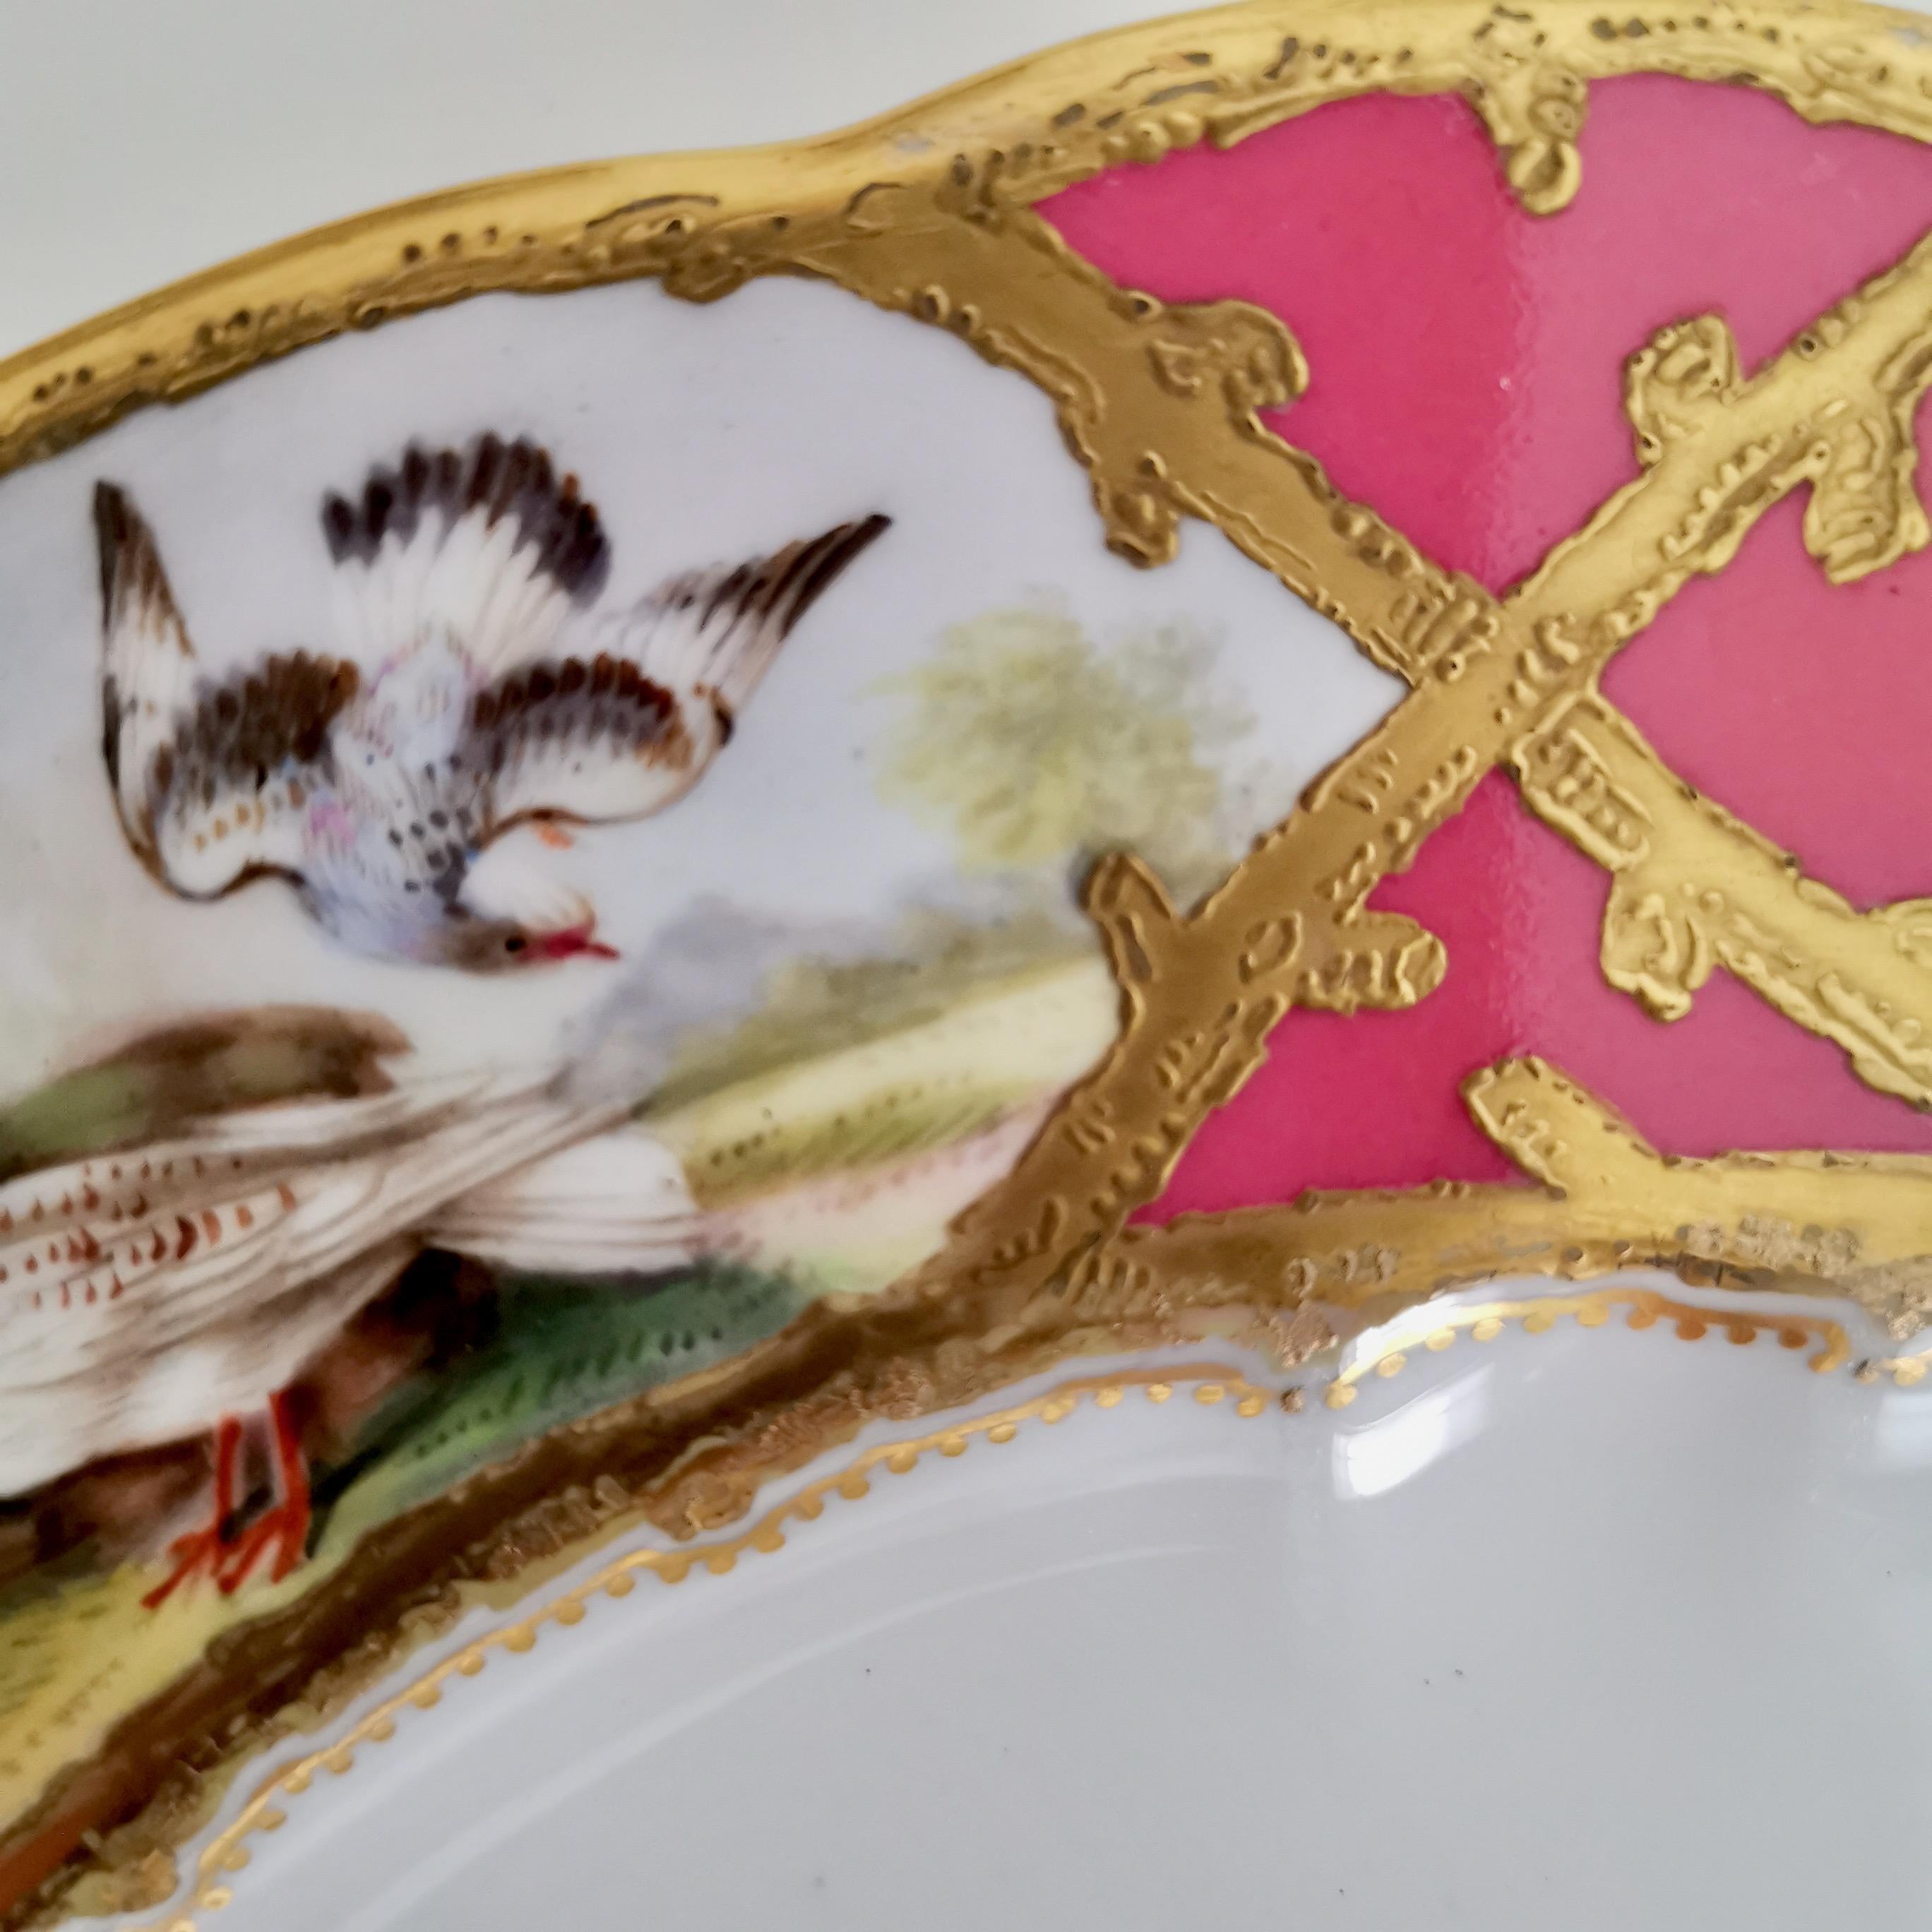 Coalport Porcelain Plate, Hot Pink with Birds and Fish, Raised Gilt, ca 1870 3